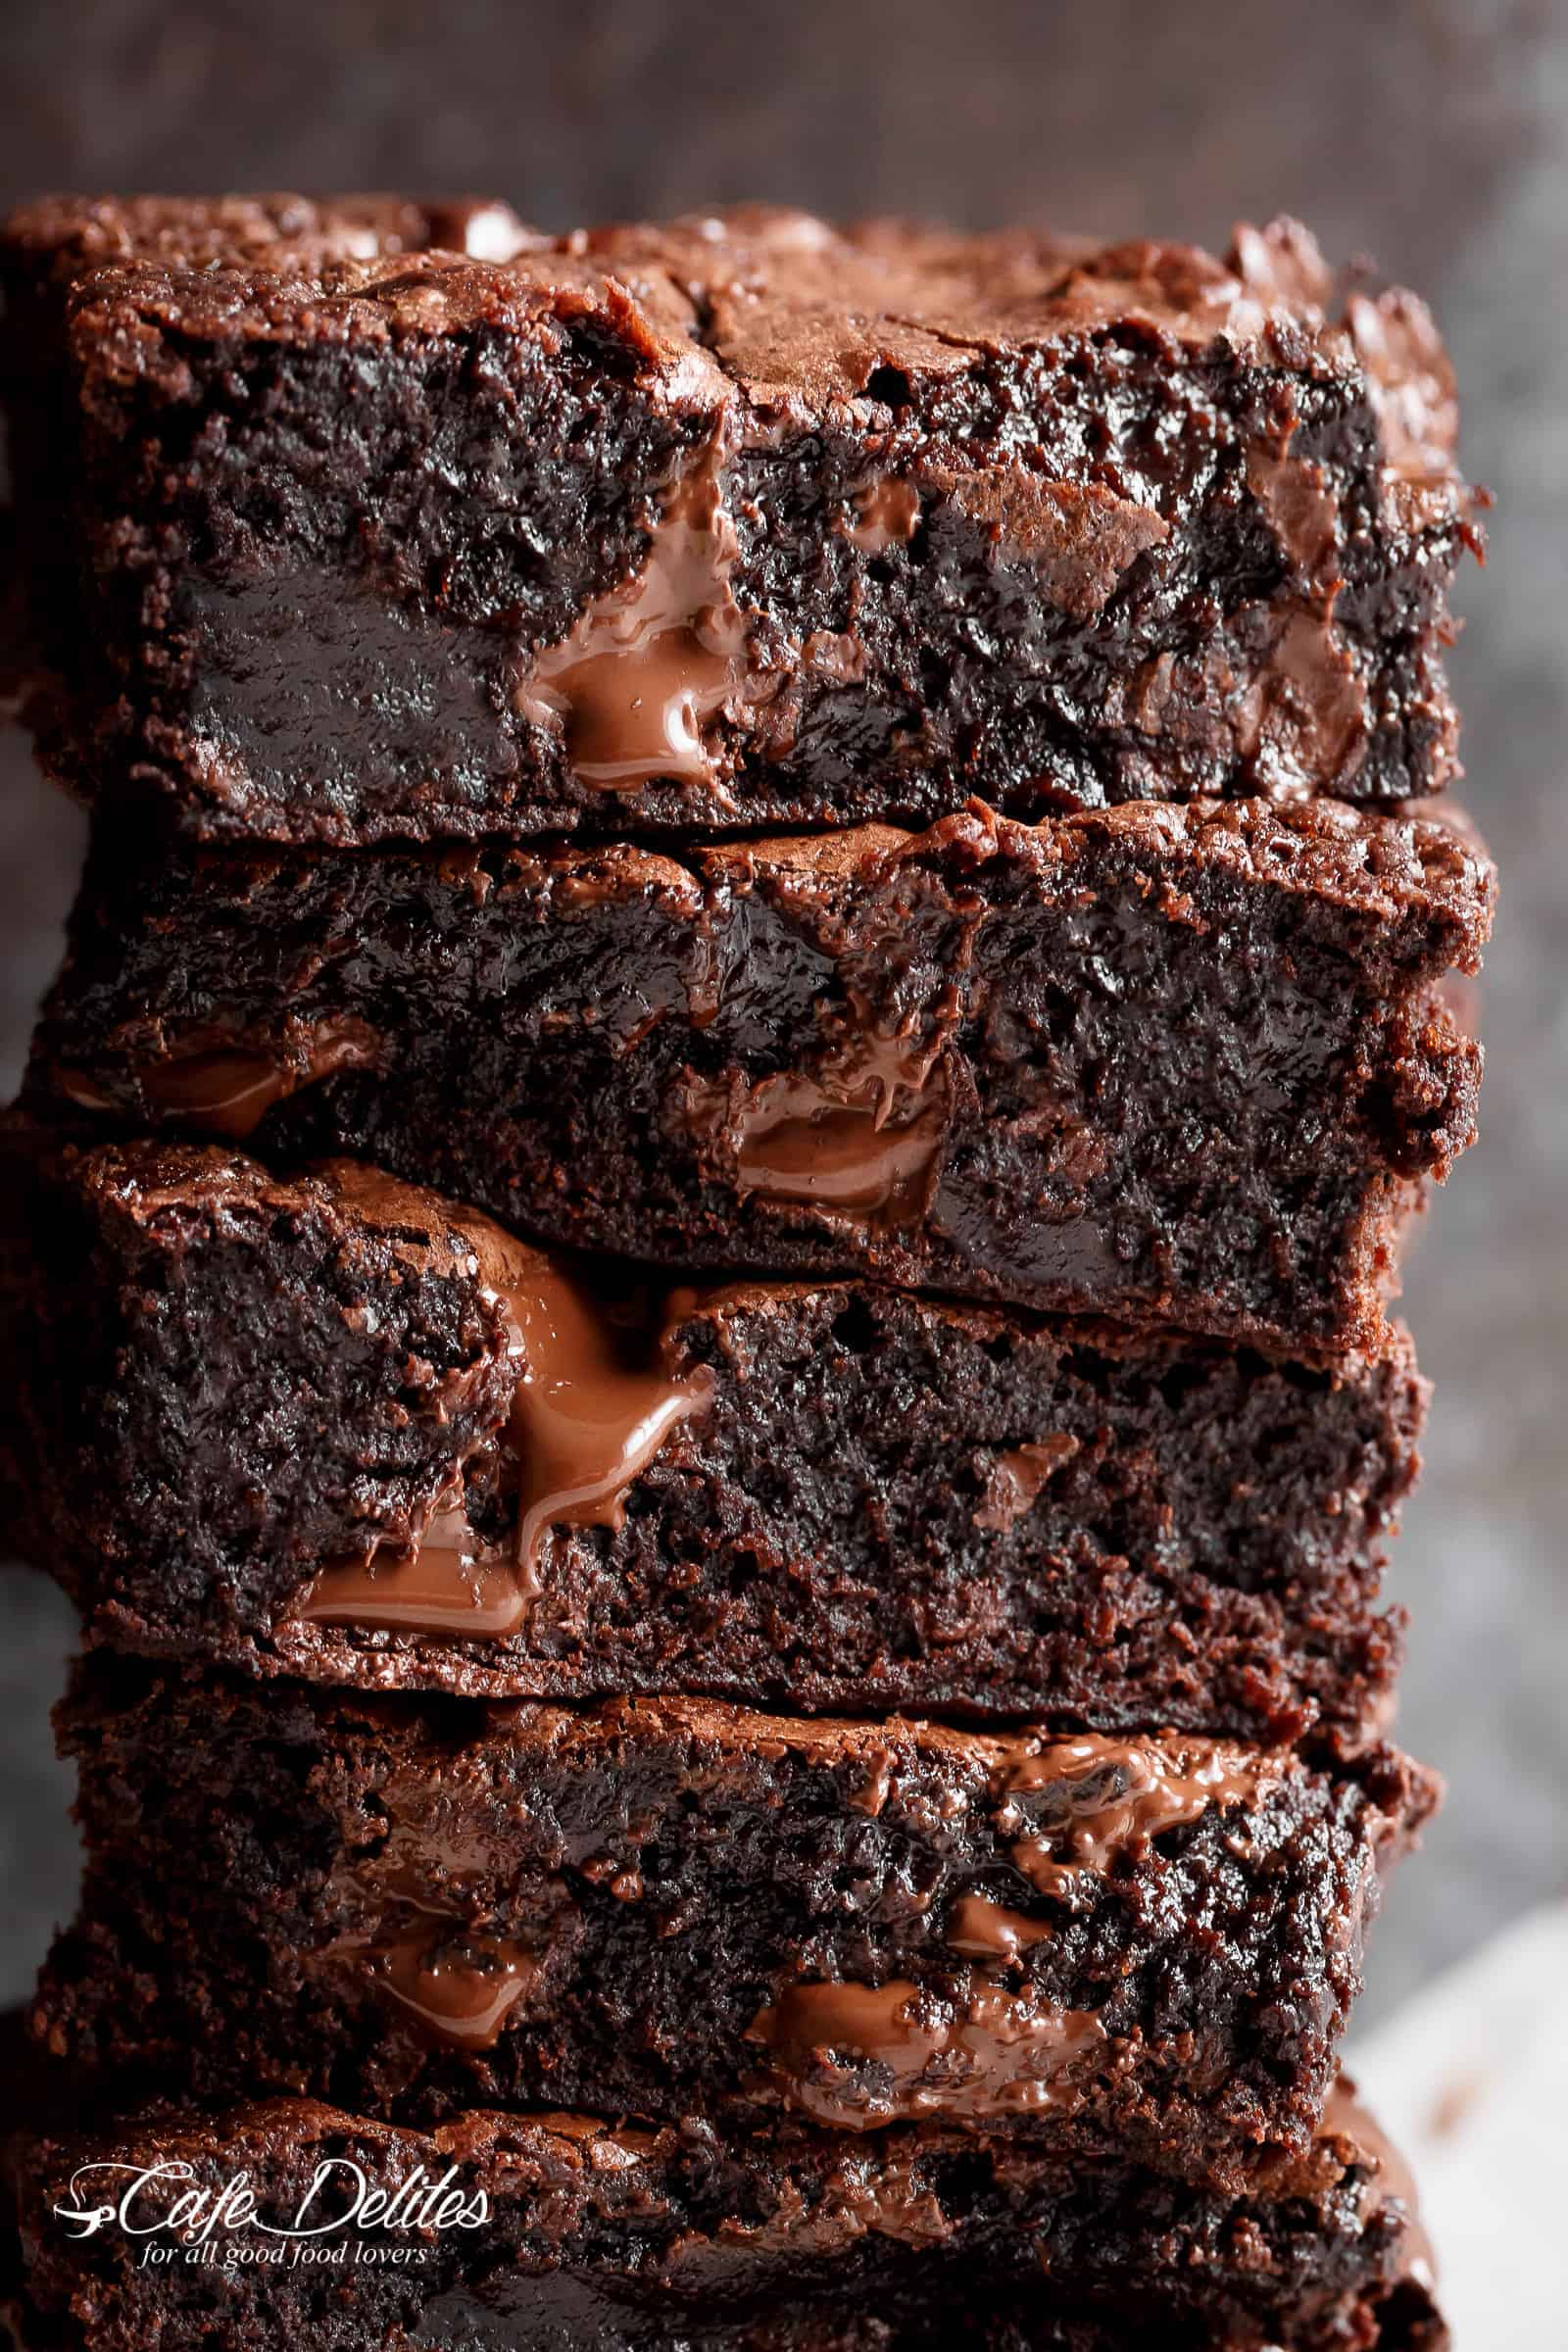 Worlds Best Fudgiest Brownies live up to their name! | cafedelites.com